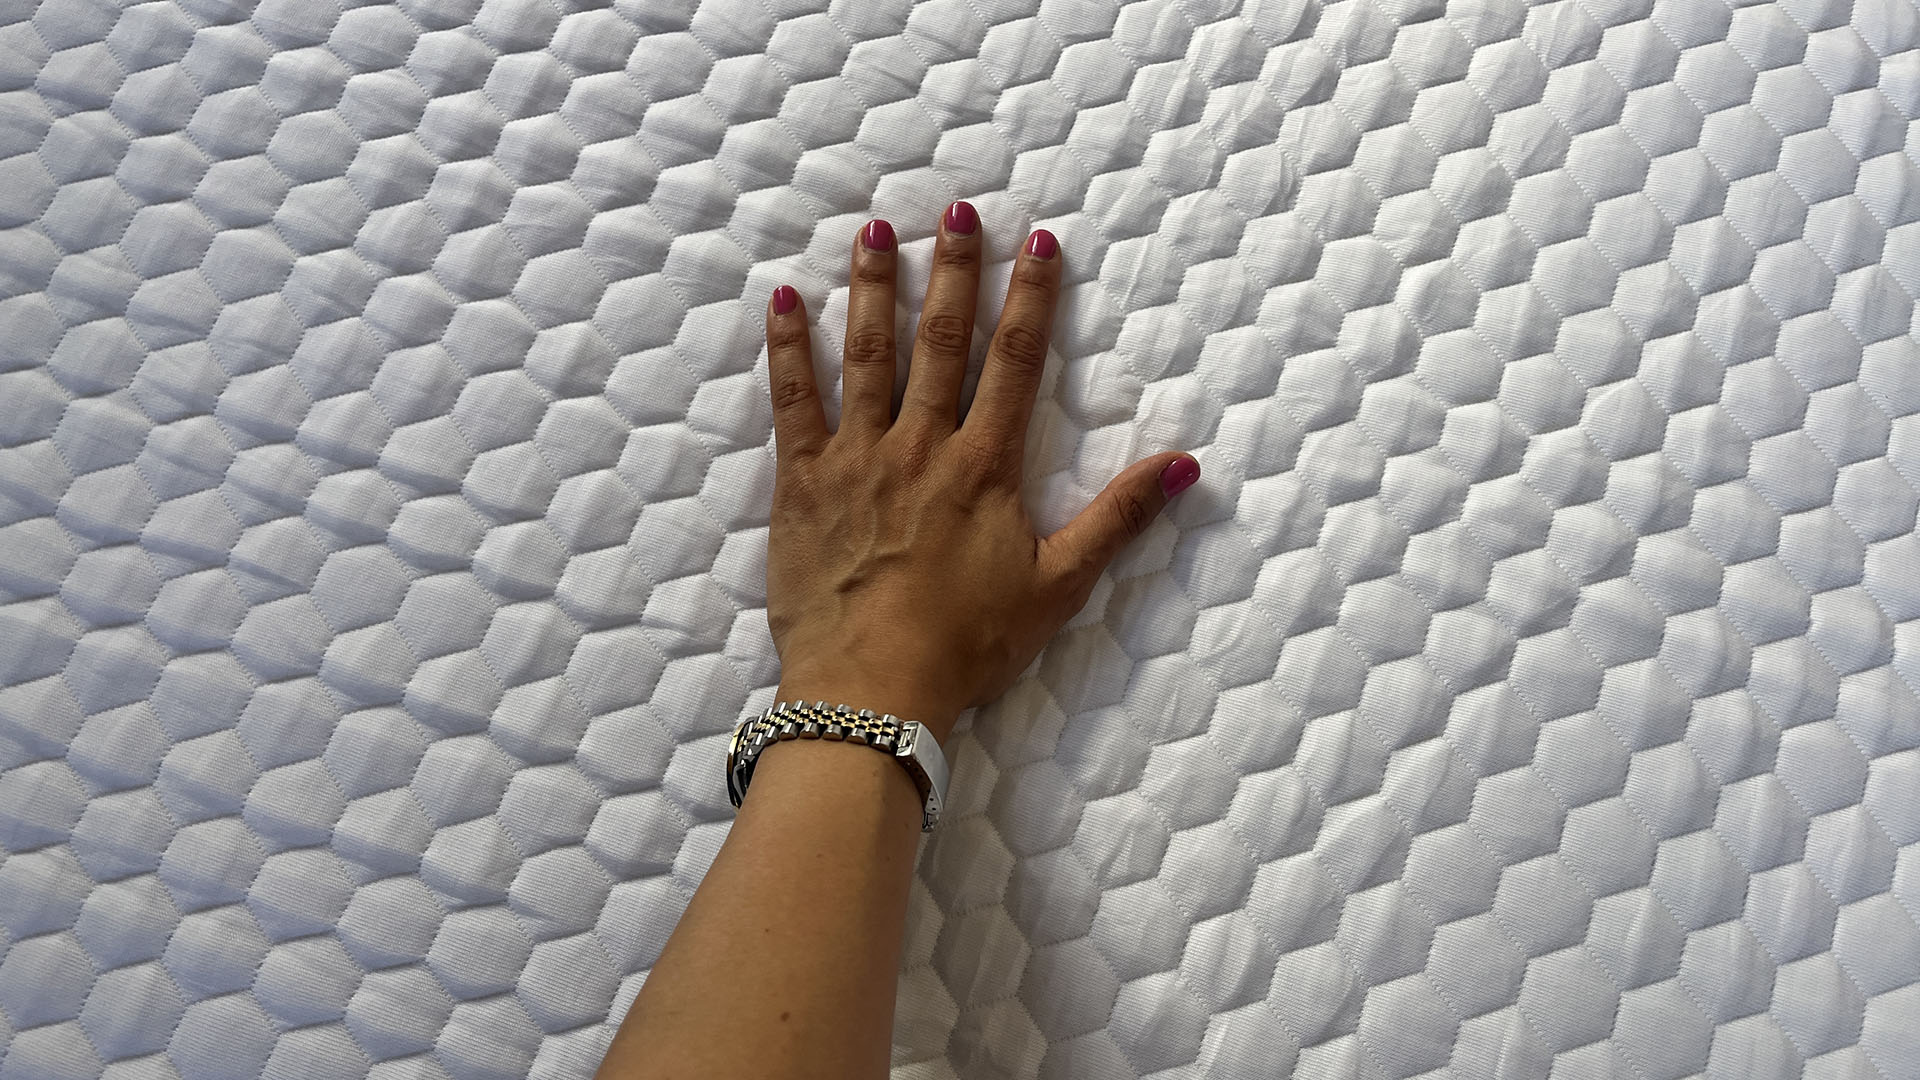 Hand resting on the Layla Essential mattress cover